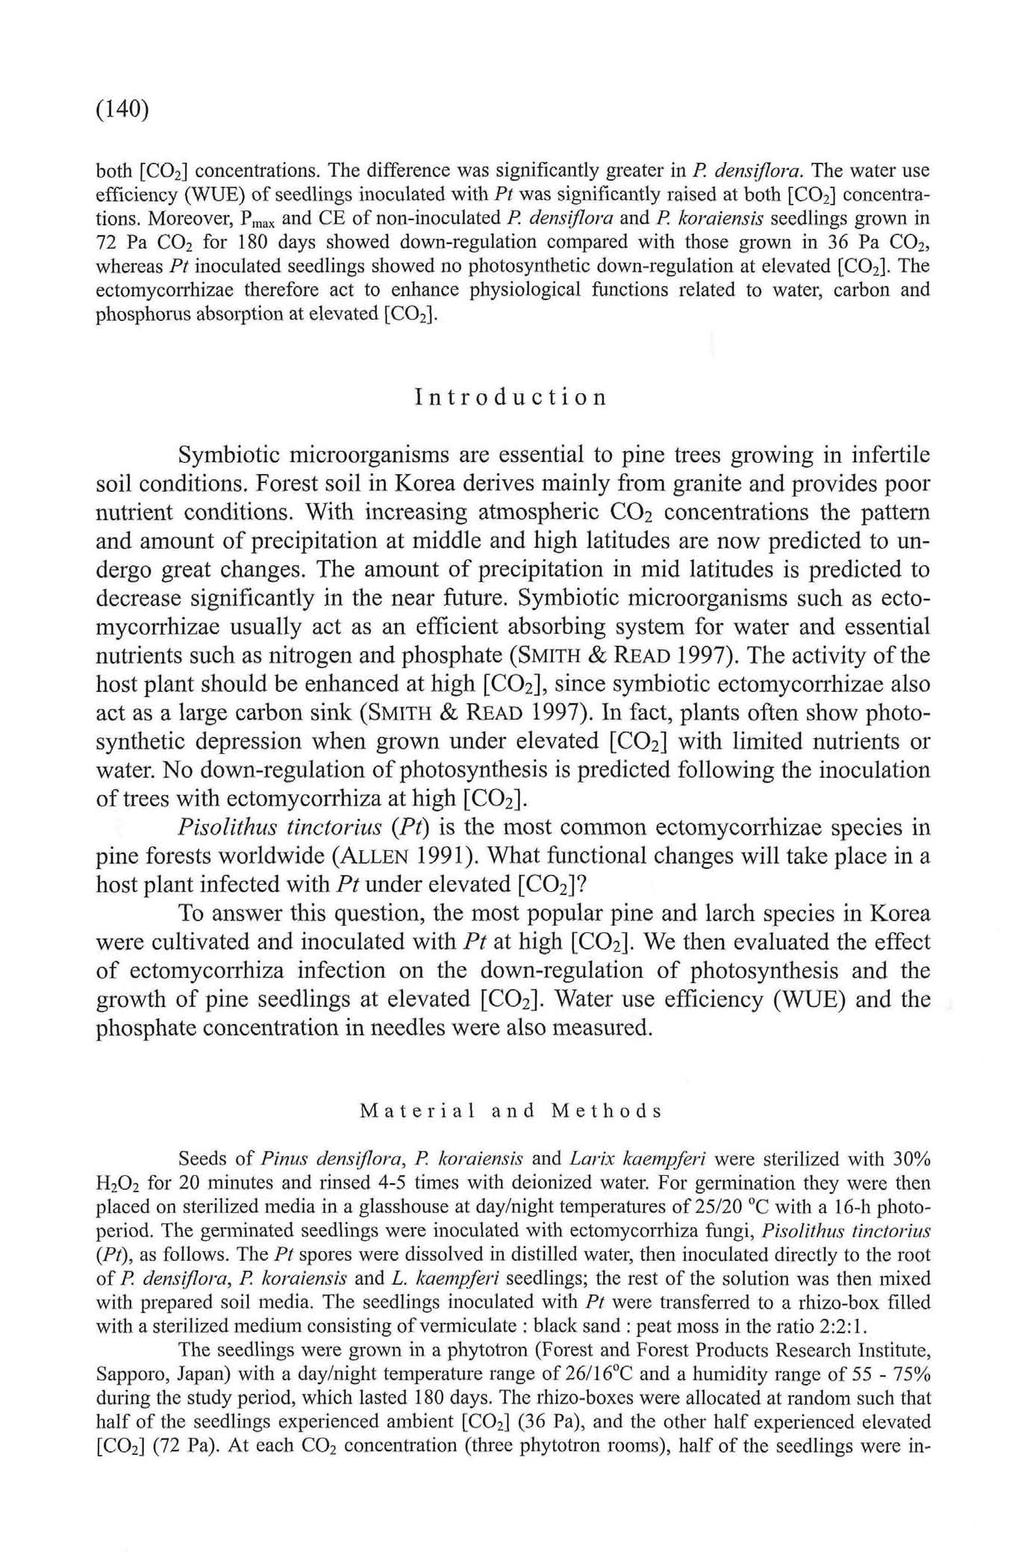 (140) both [CO 2 ] concentrations. The difference was significantly greater in P. densiflora.